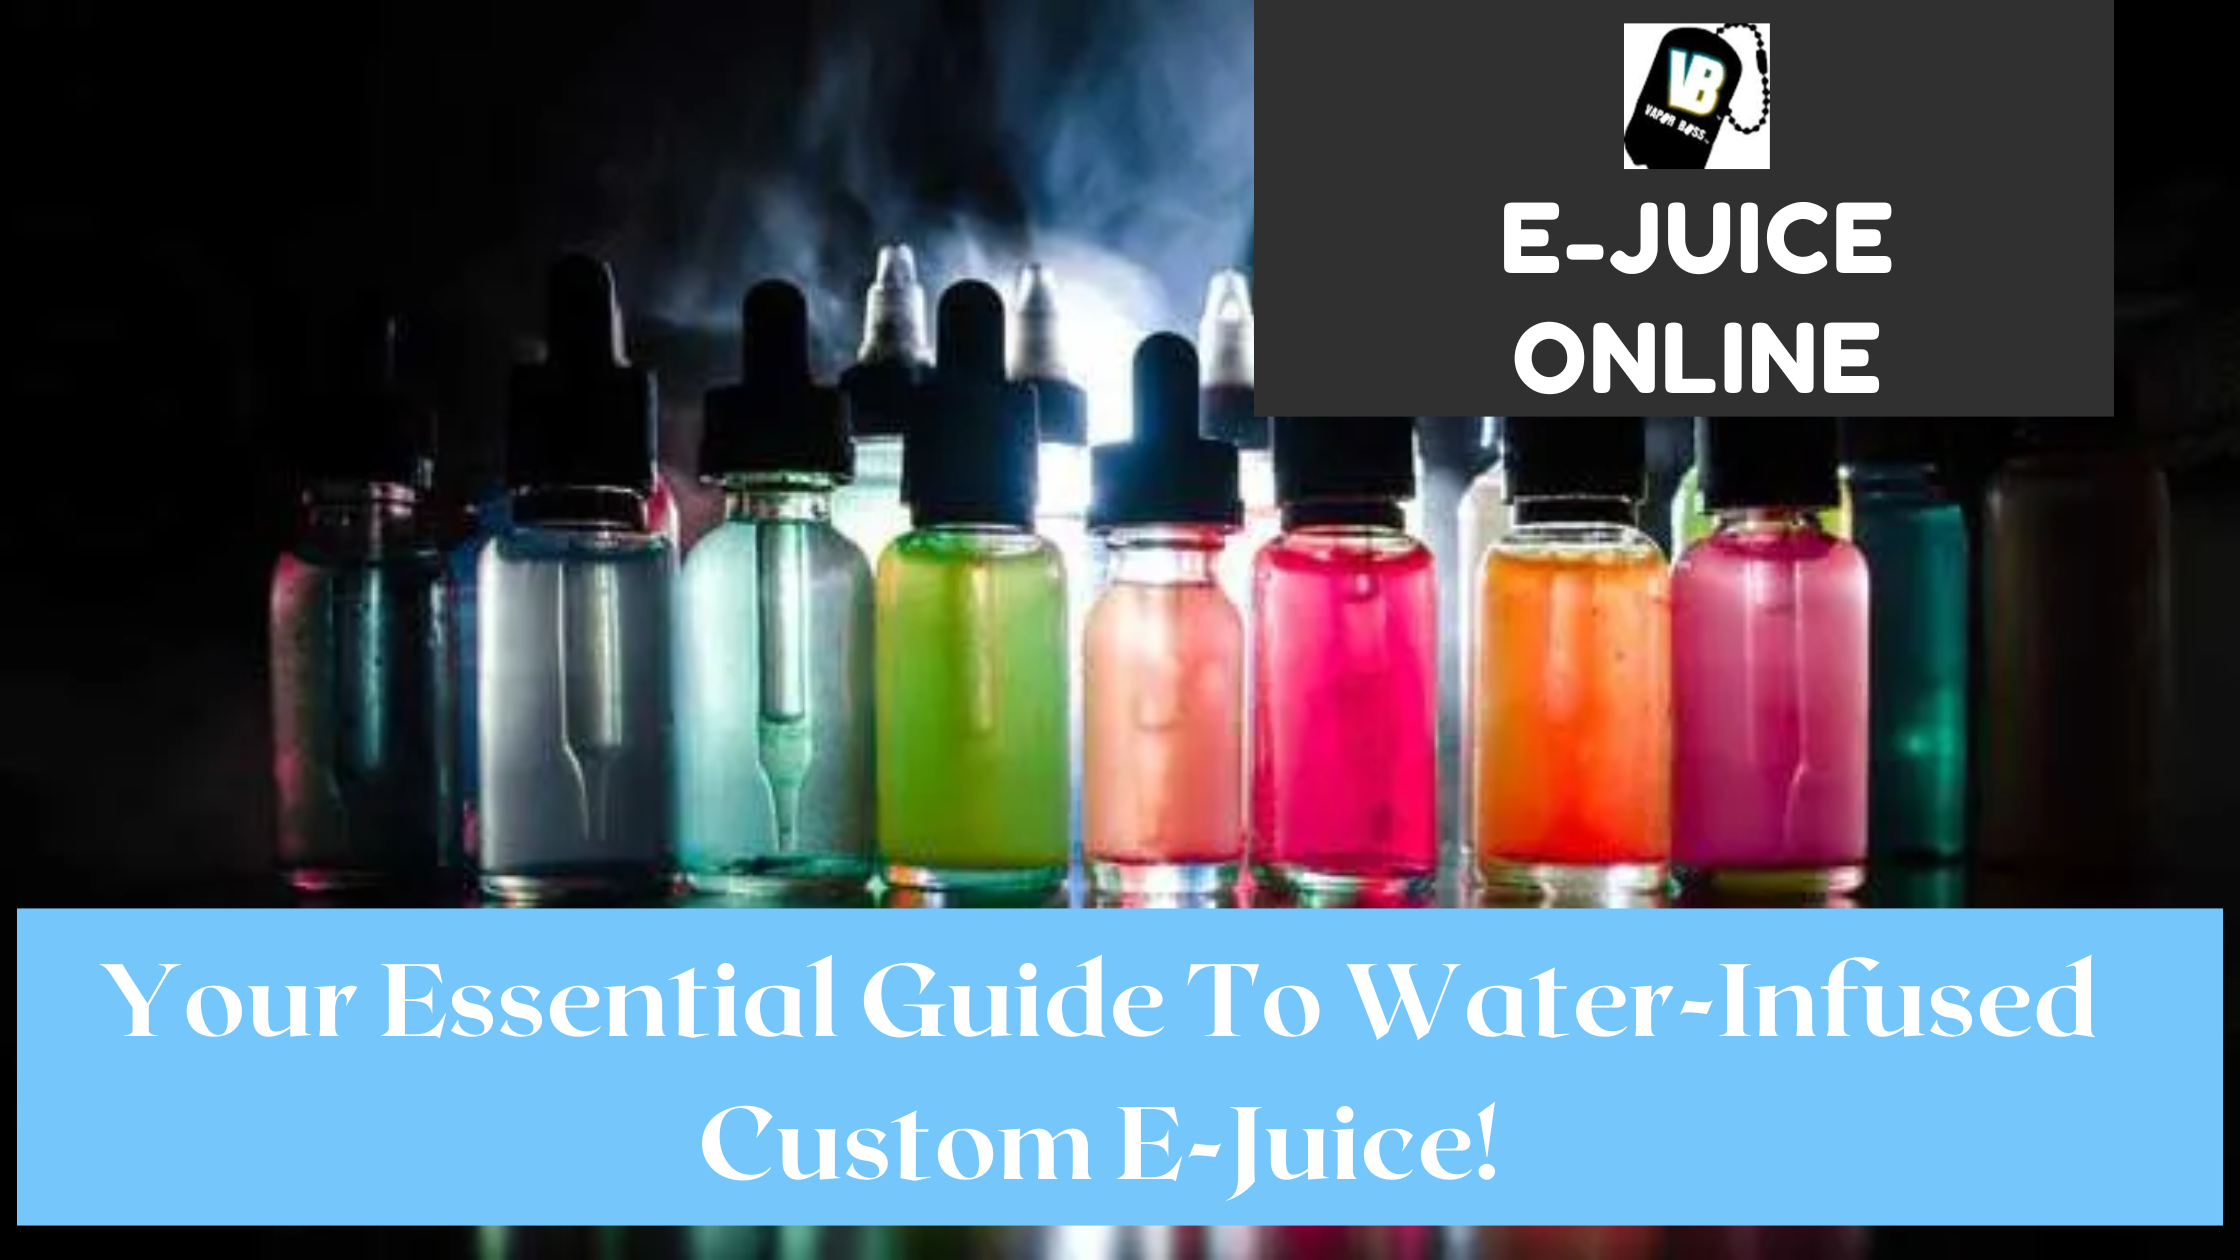 Your Essential Guide To Water-Infused Custom E-Juice!